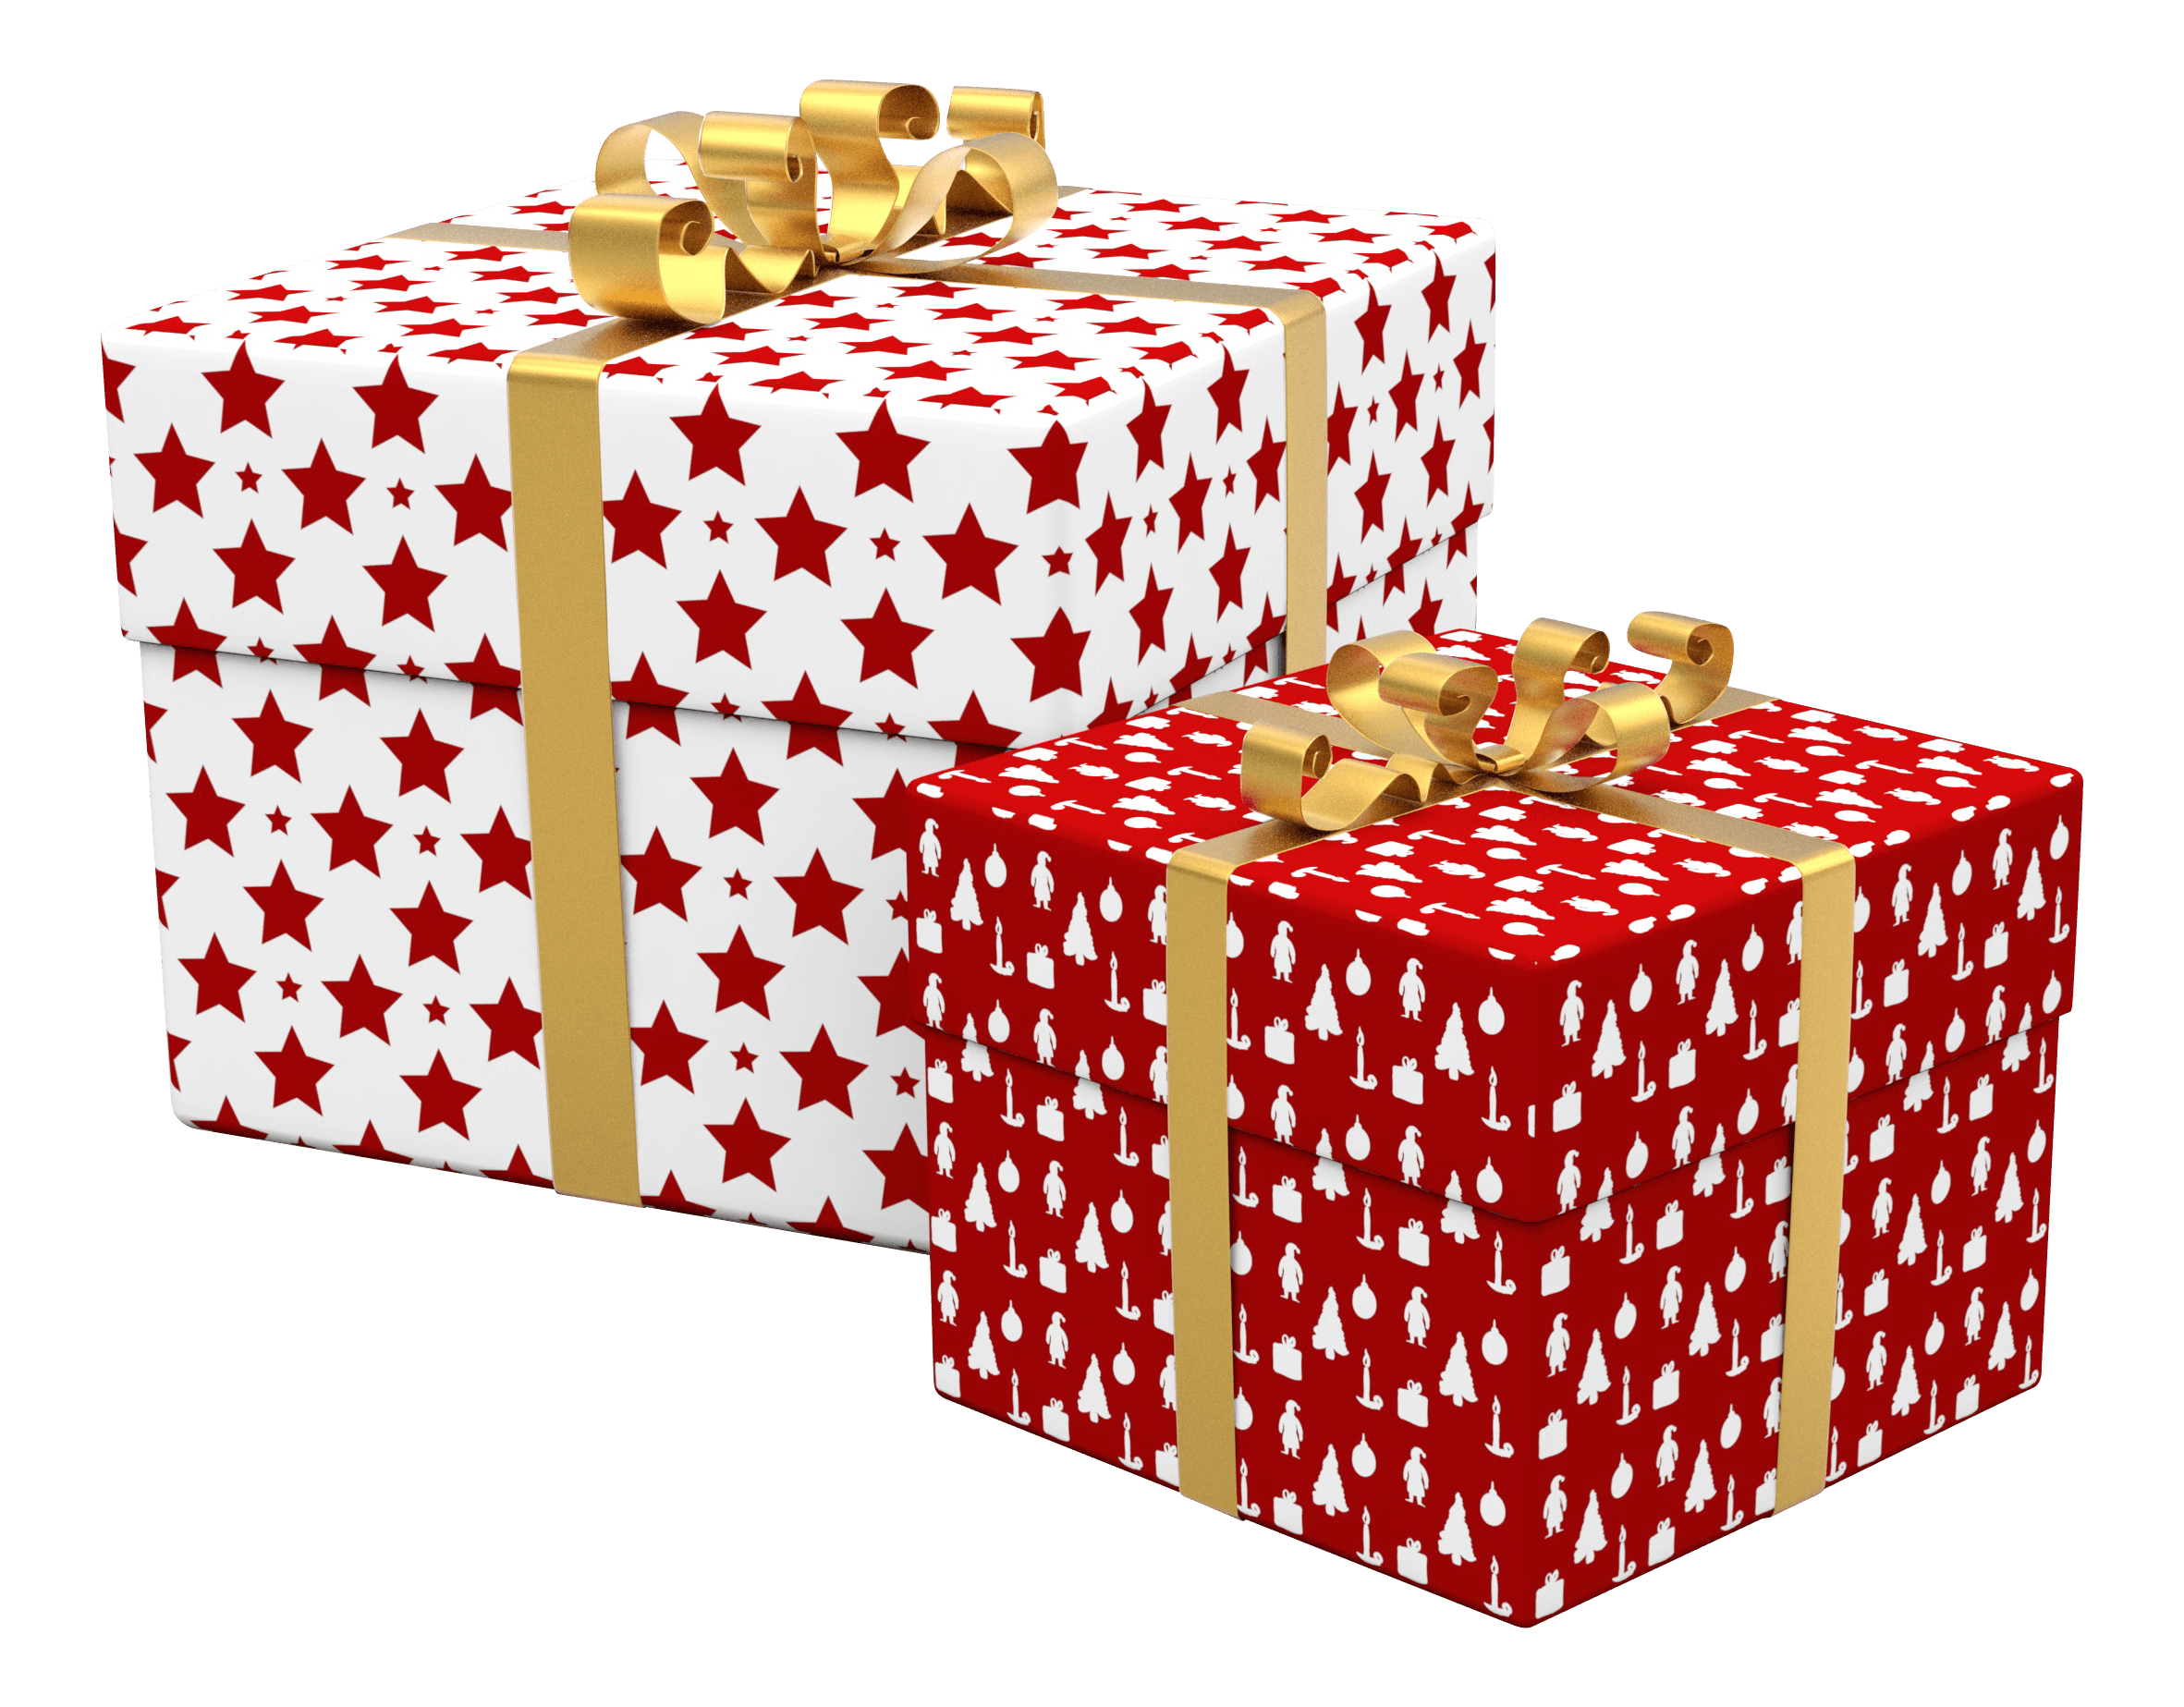 Christmas Gift PNG Image Transparent Background | PNG Arts